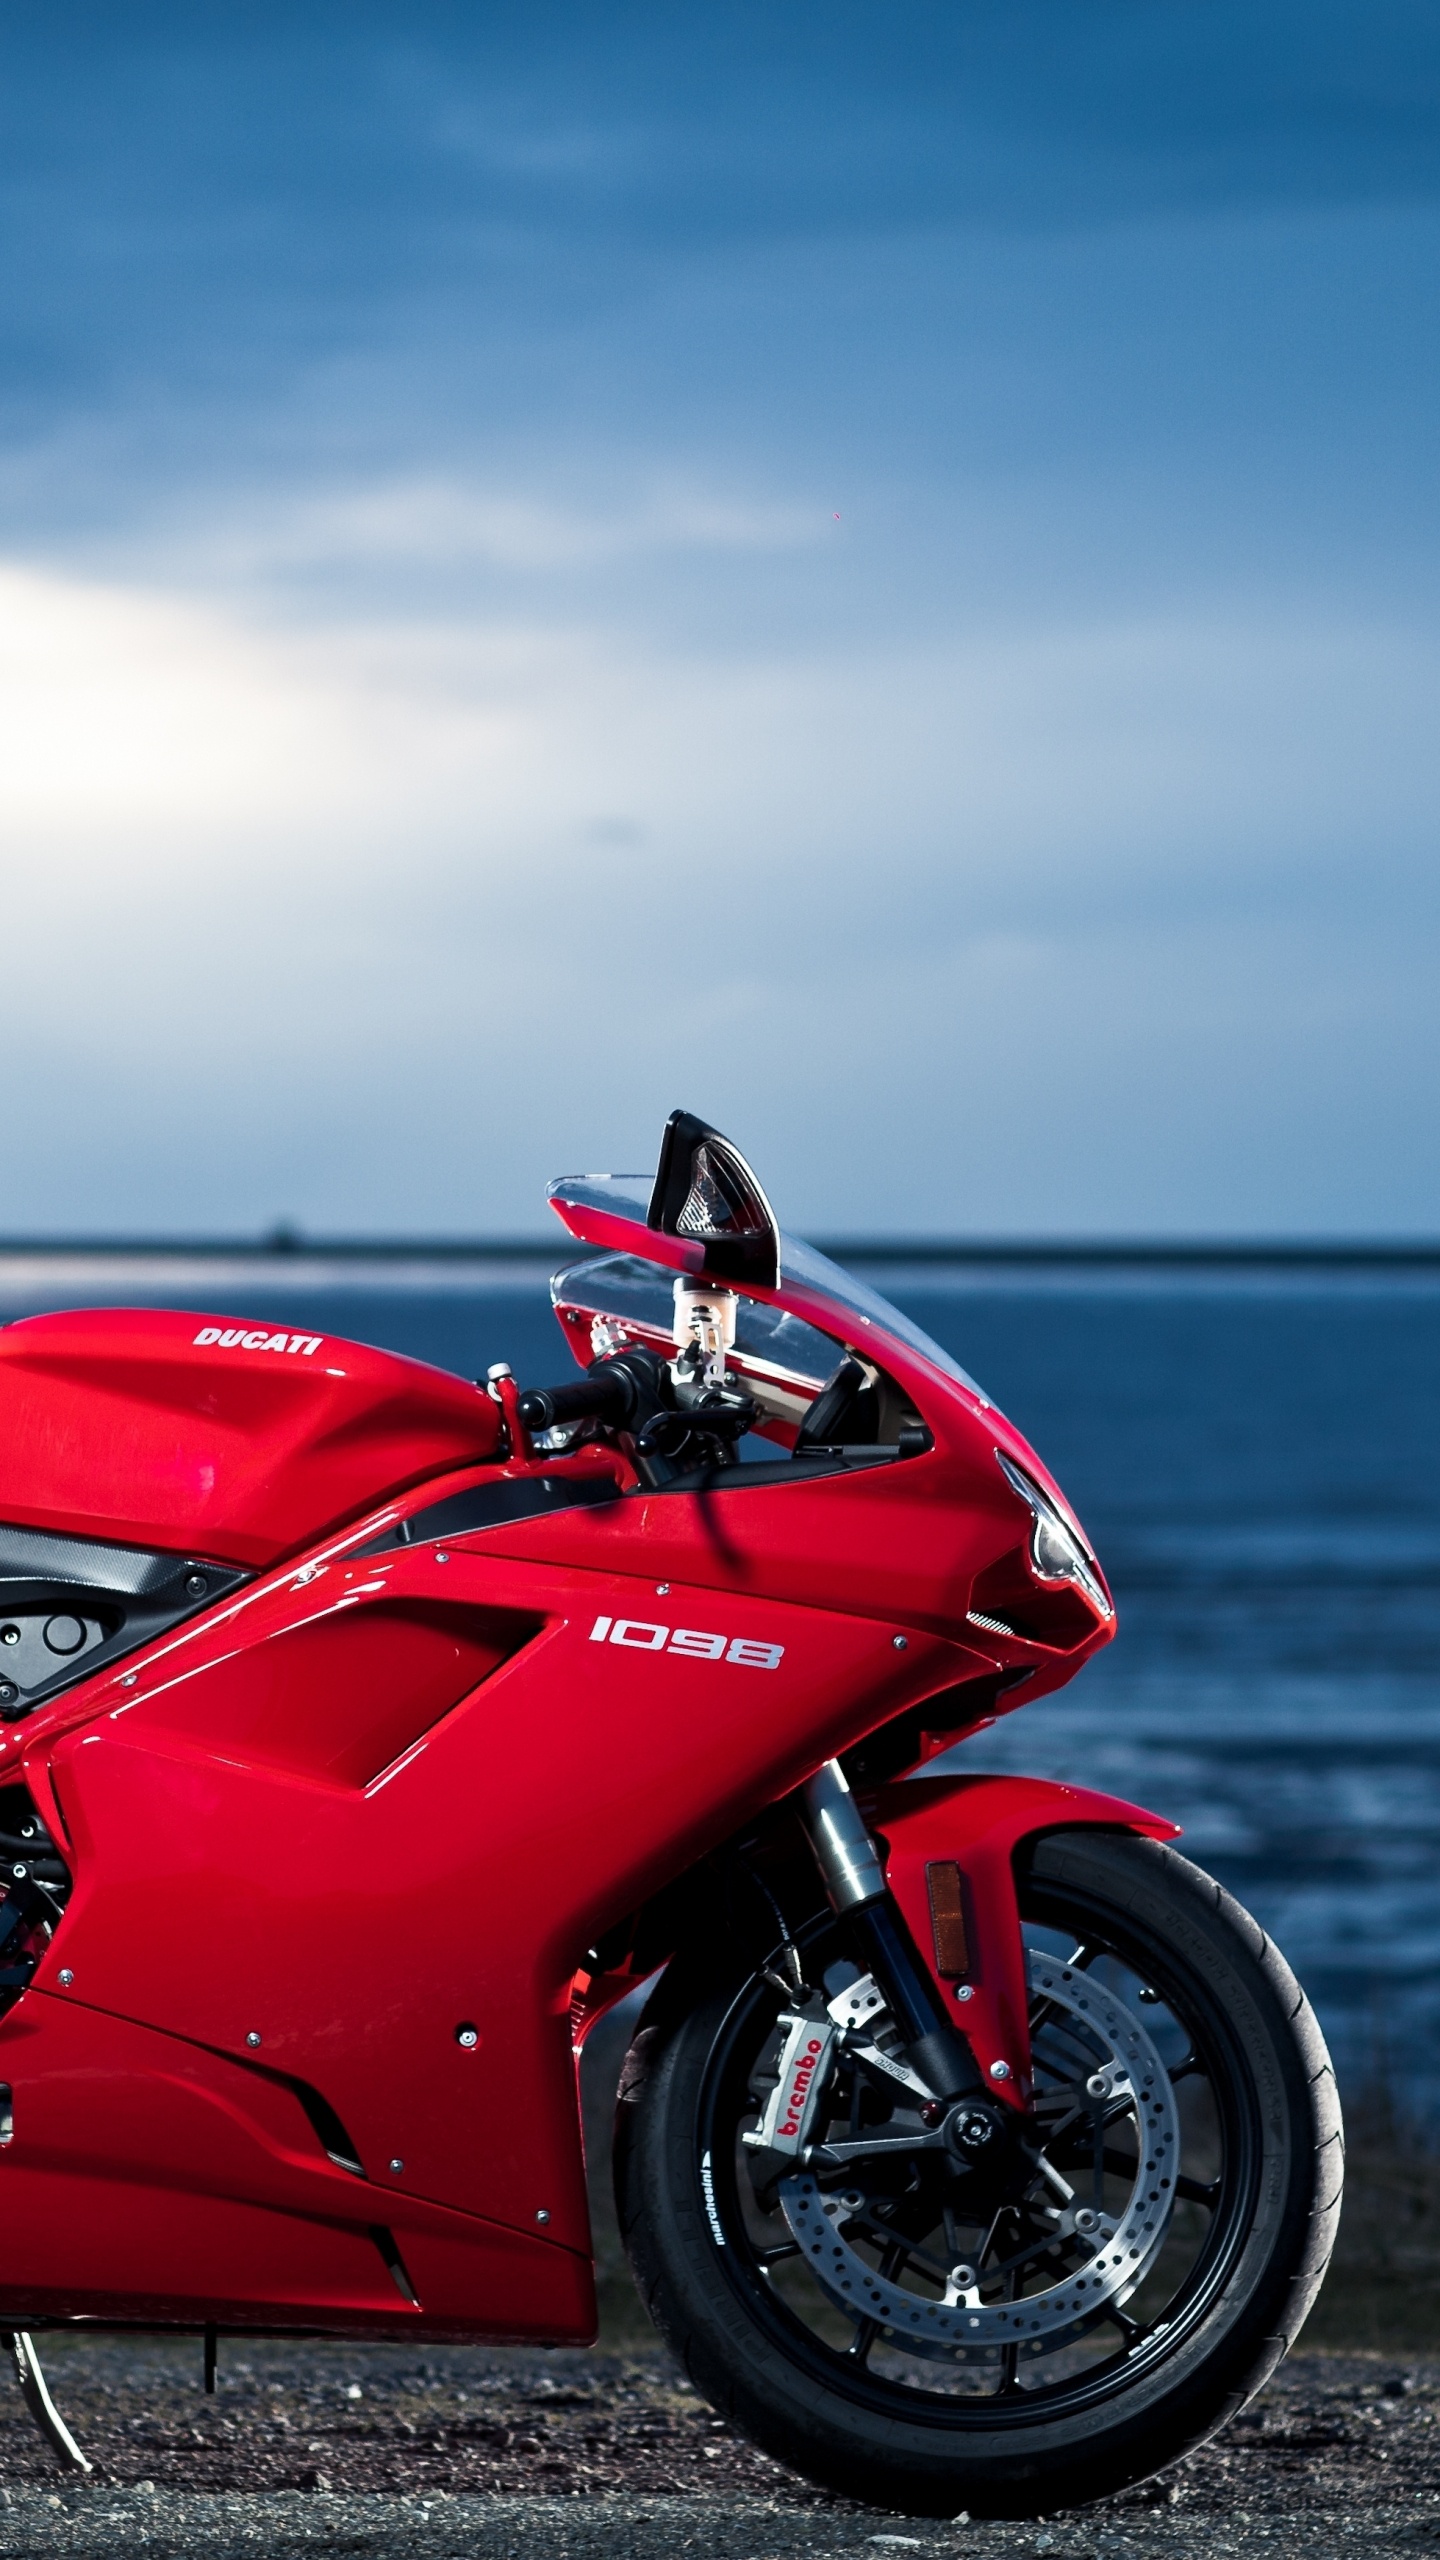 Red and Black Sports Bike on Seashore During Daytime. Wallpaper in 1440x2560 Resolution